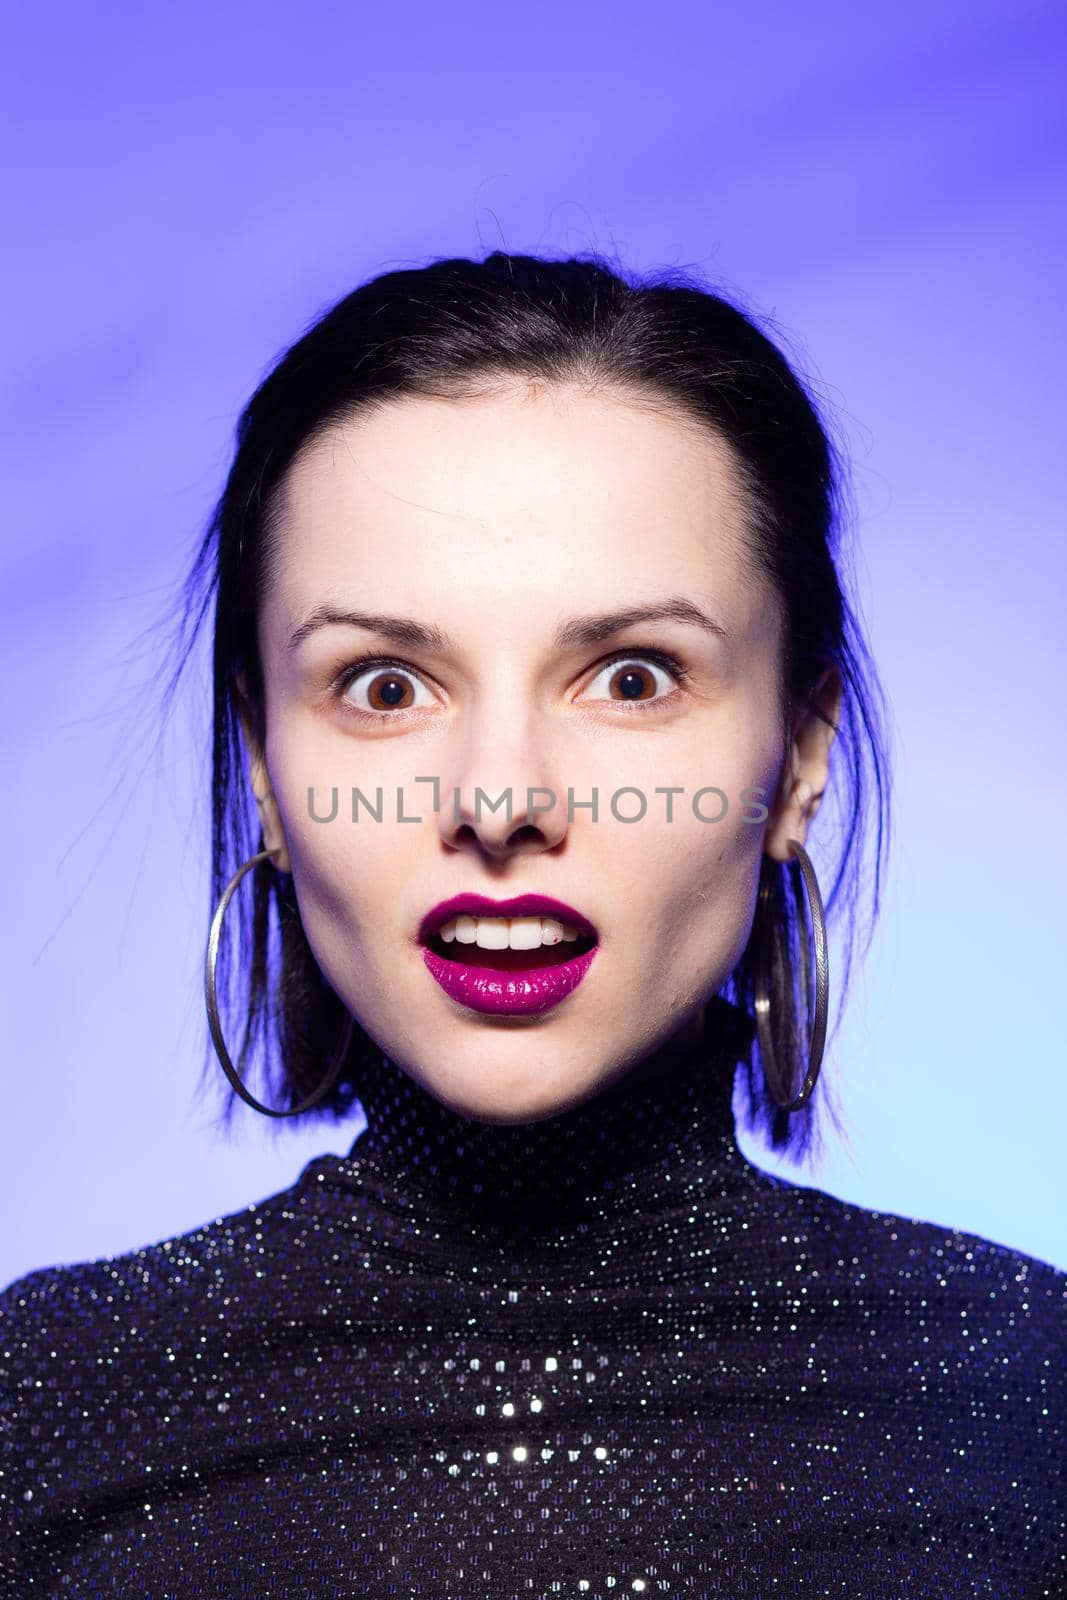 brunette woman with purple lips, blue background. High quality photo